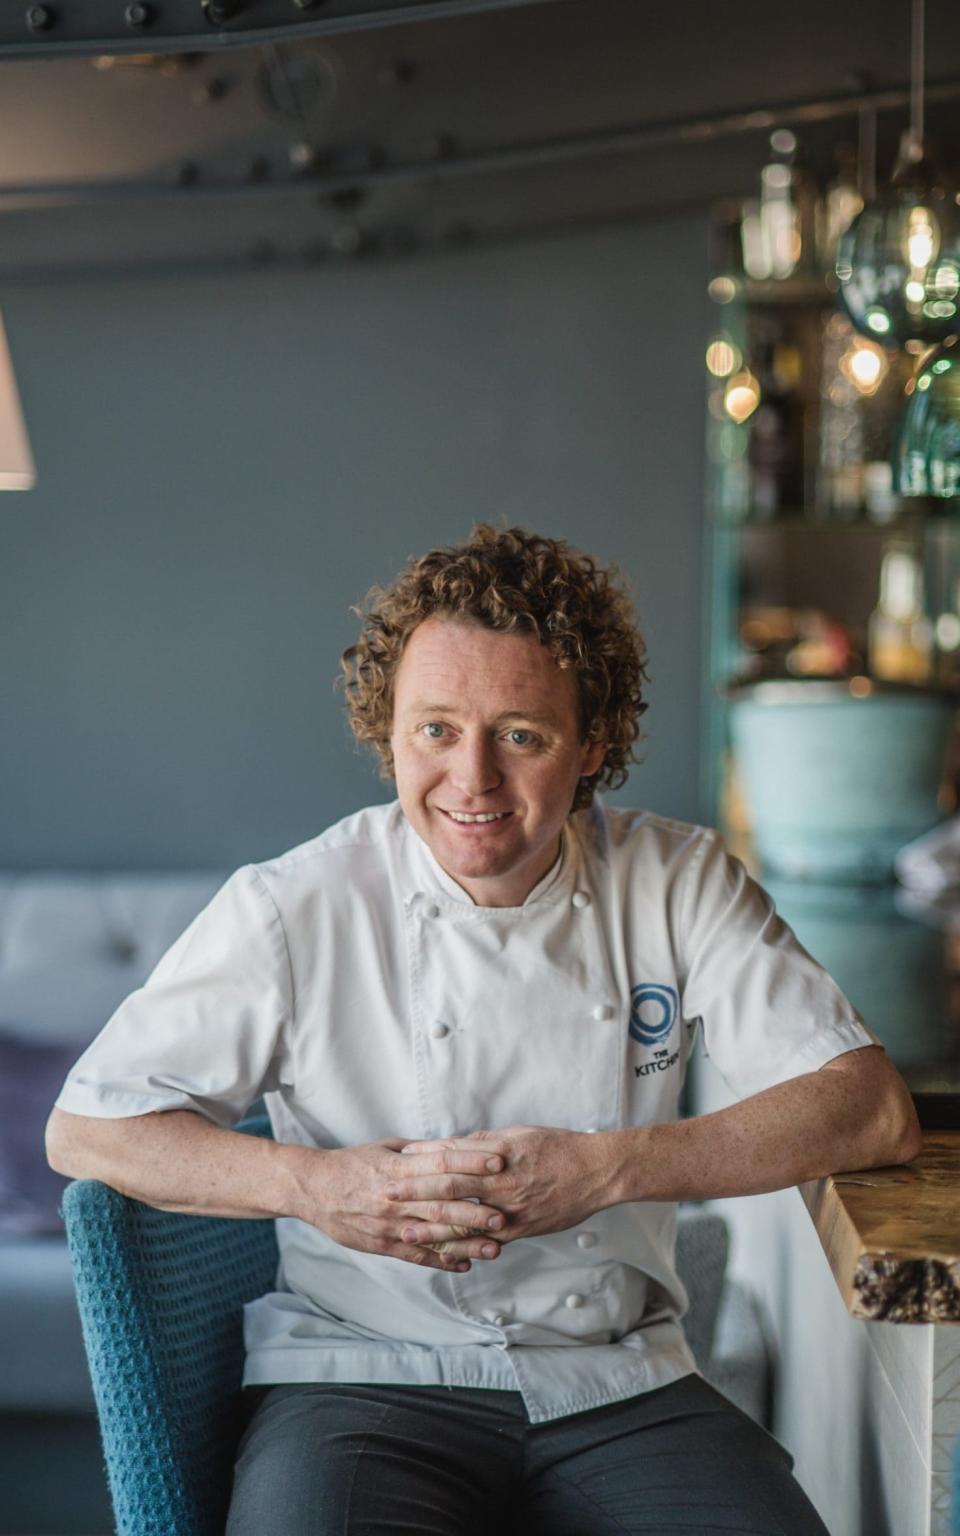 Tom Kitchin is among those to close businesses - Tom Kitchin Food/Tom Kitchin Food